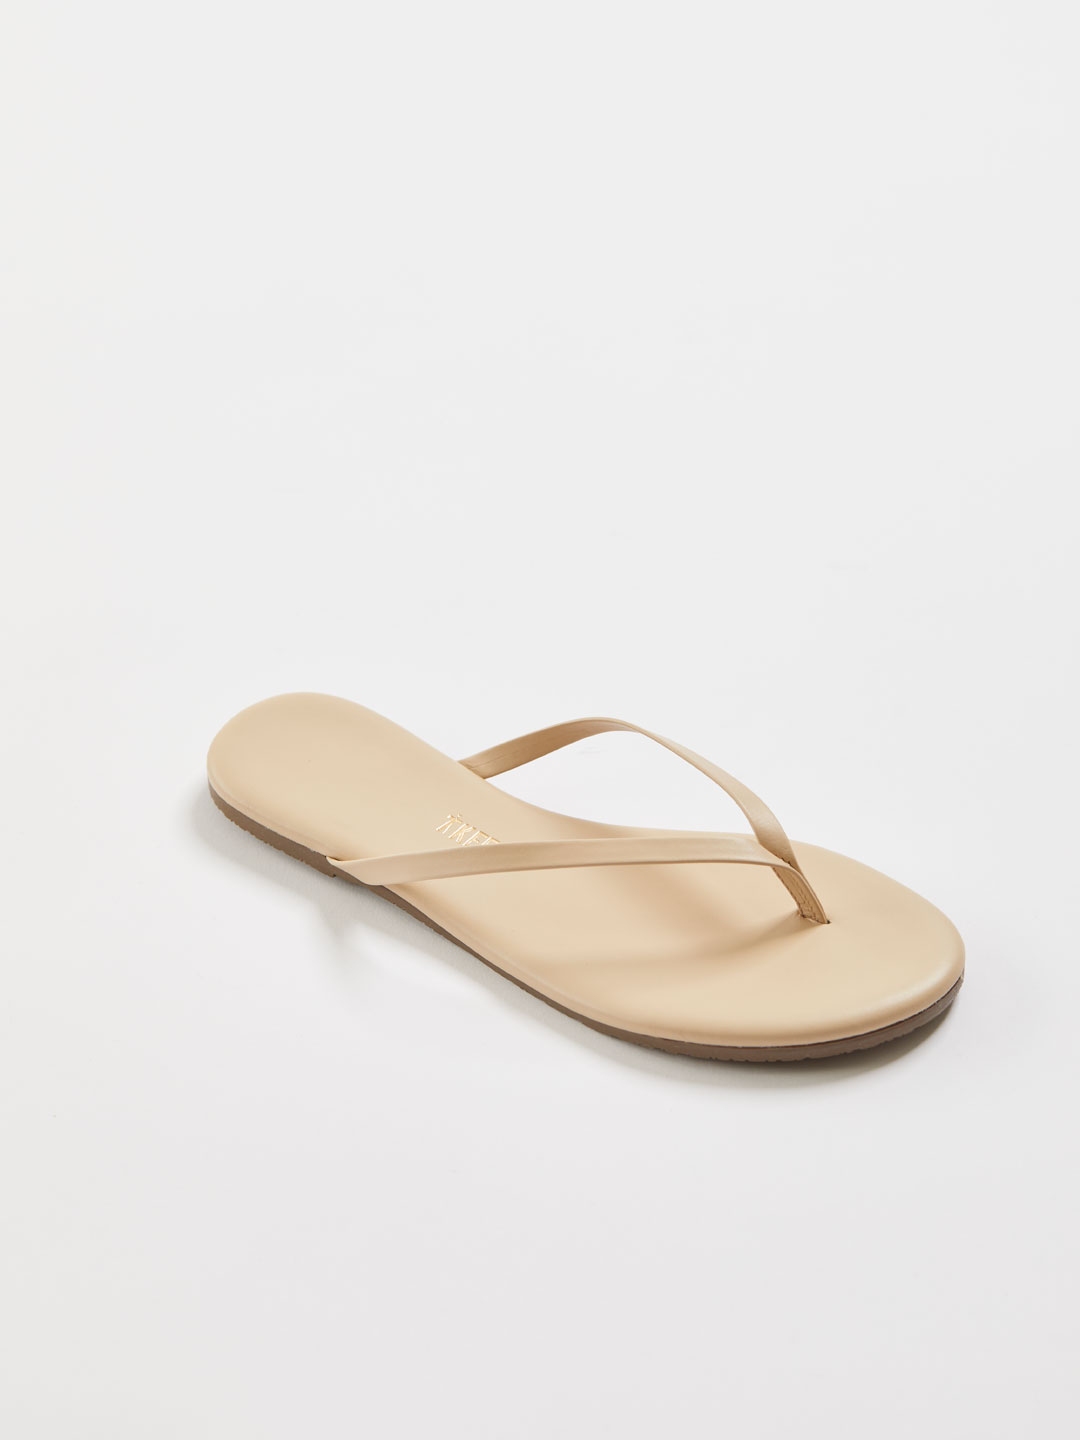 Most Loved Signature Flip Flop Sandals - Seashell/Off White